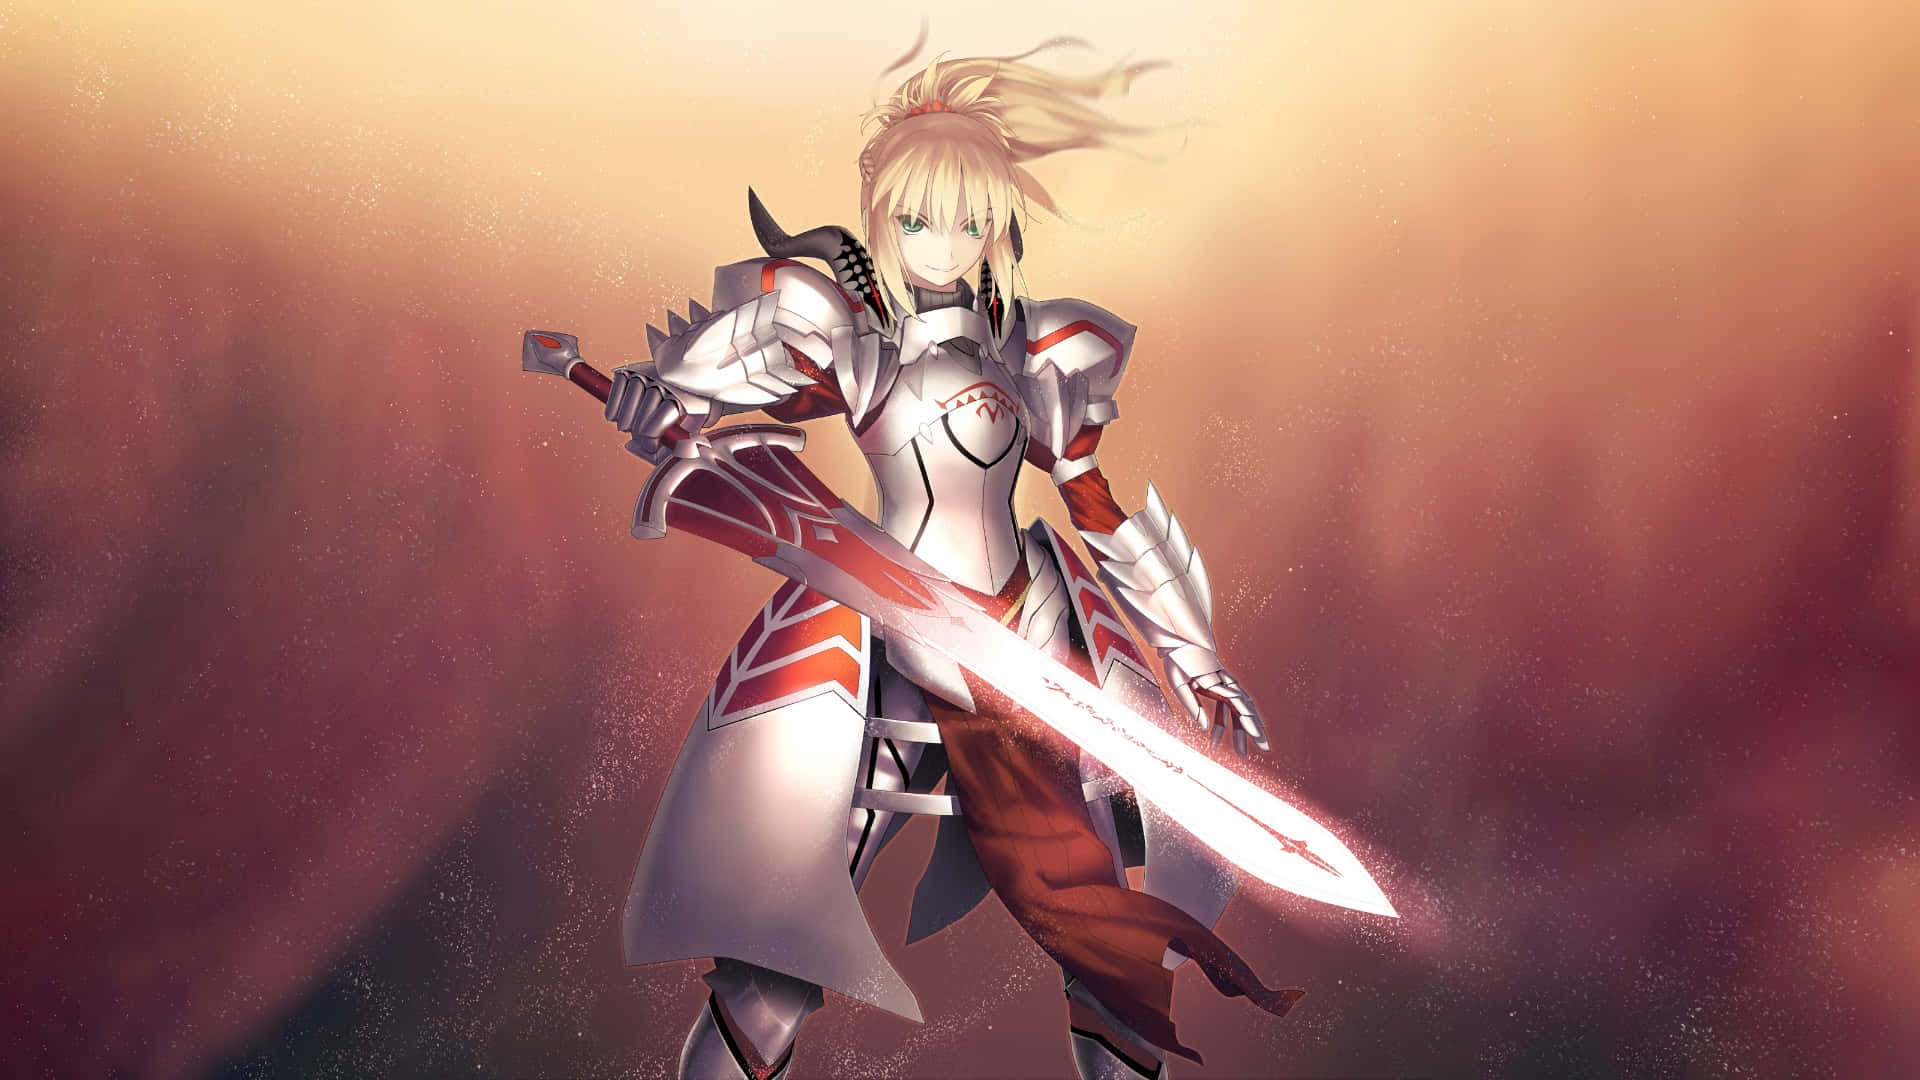 Fierce Mordred From Fate Grand Order Game Ready For Battle Wallpaper